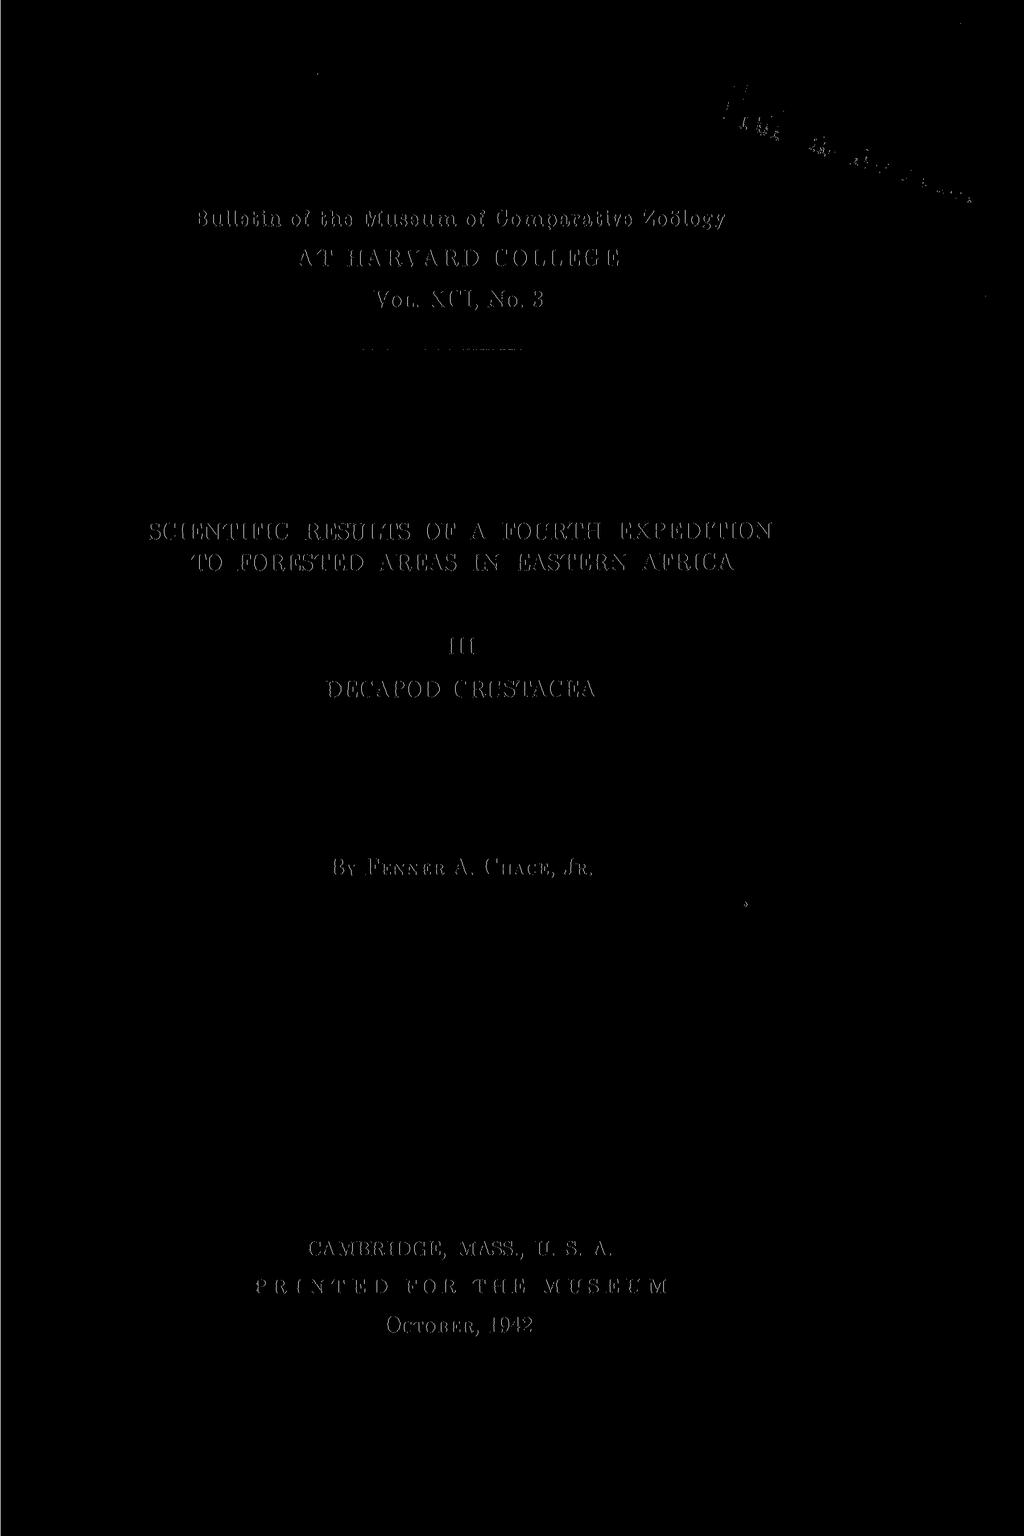 Bulletin of the Museum of Comparative Zoology AT HARVARD COLLEGE VOL. XCI, NO.